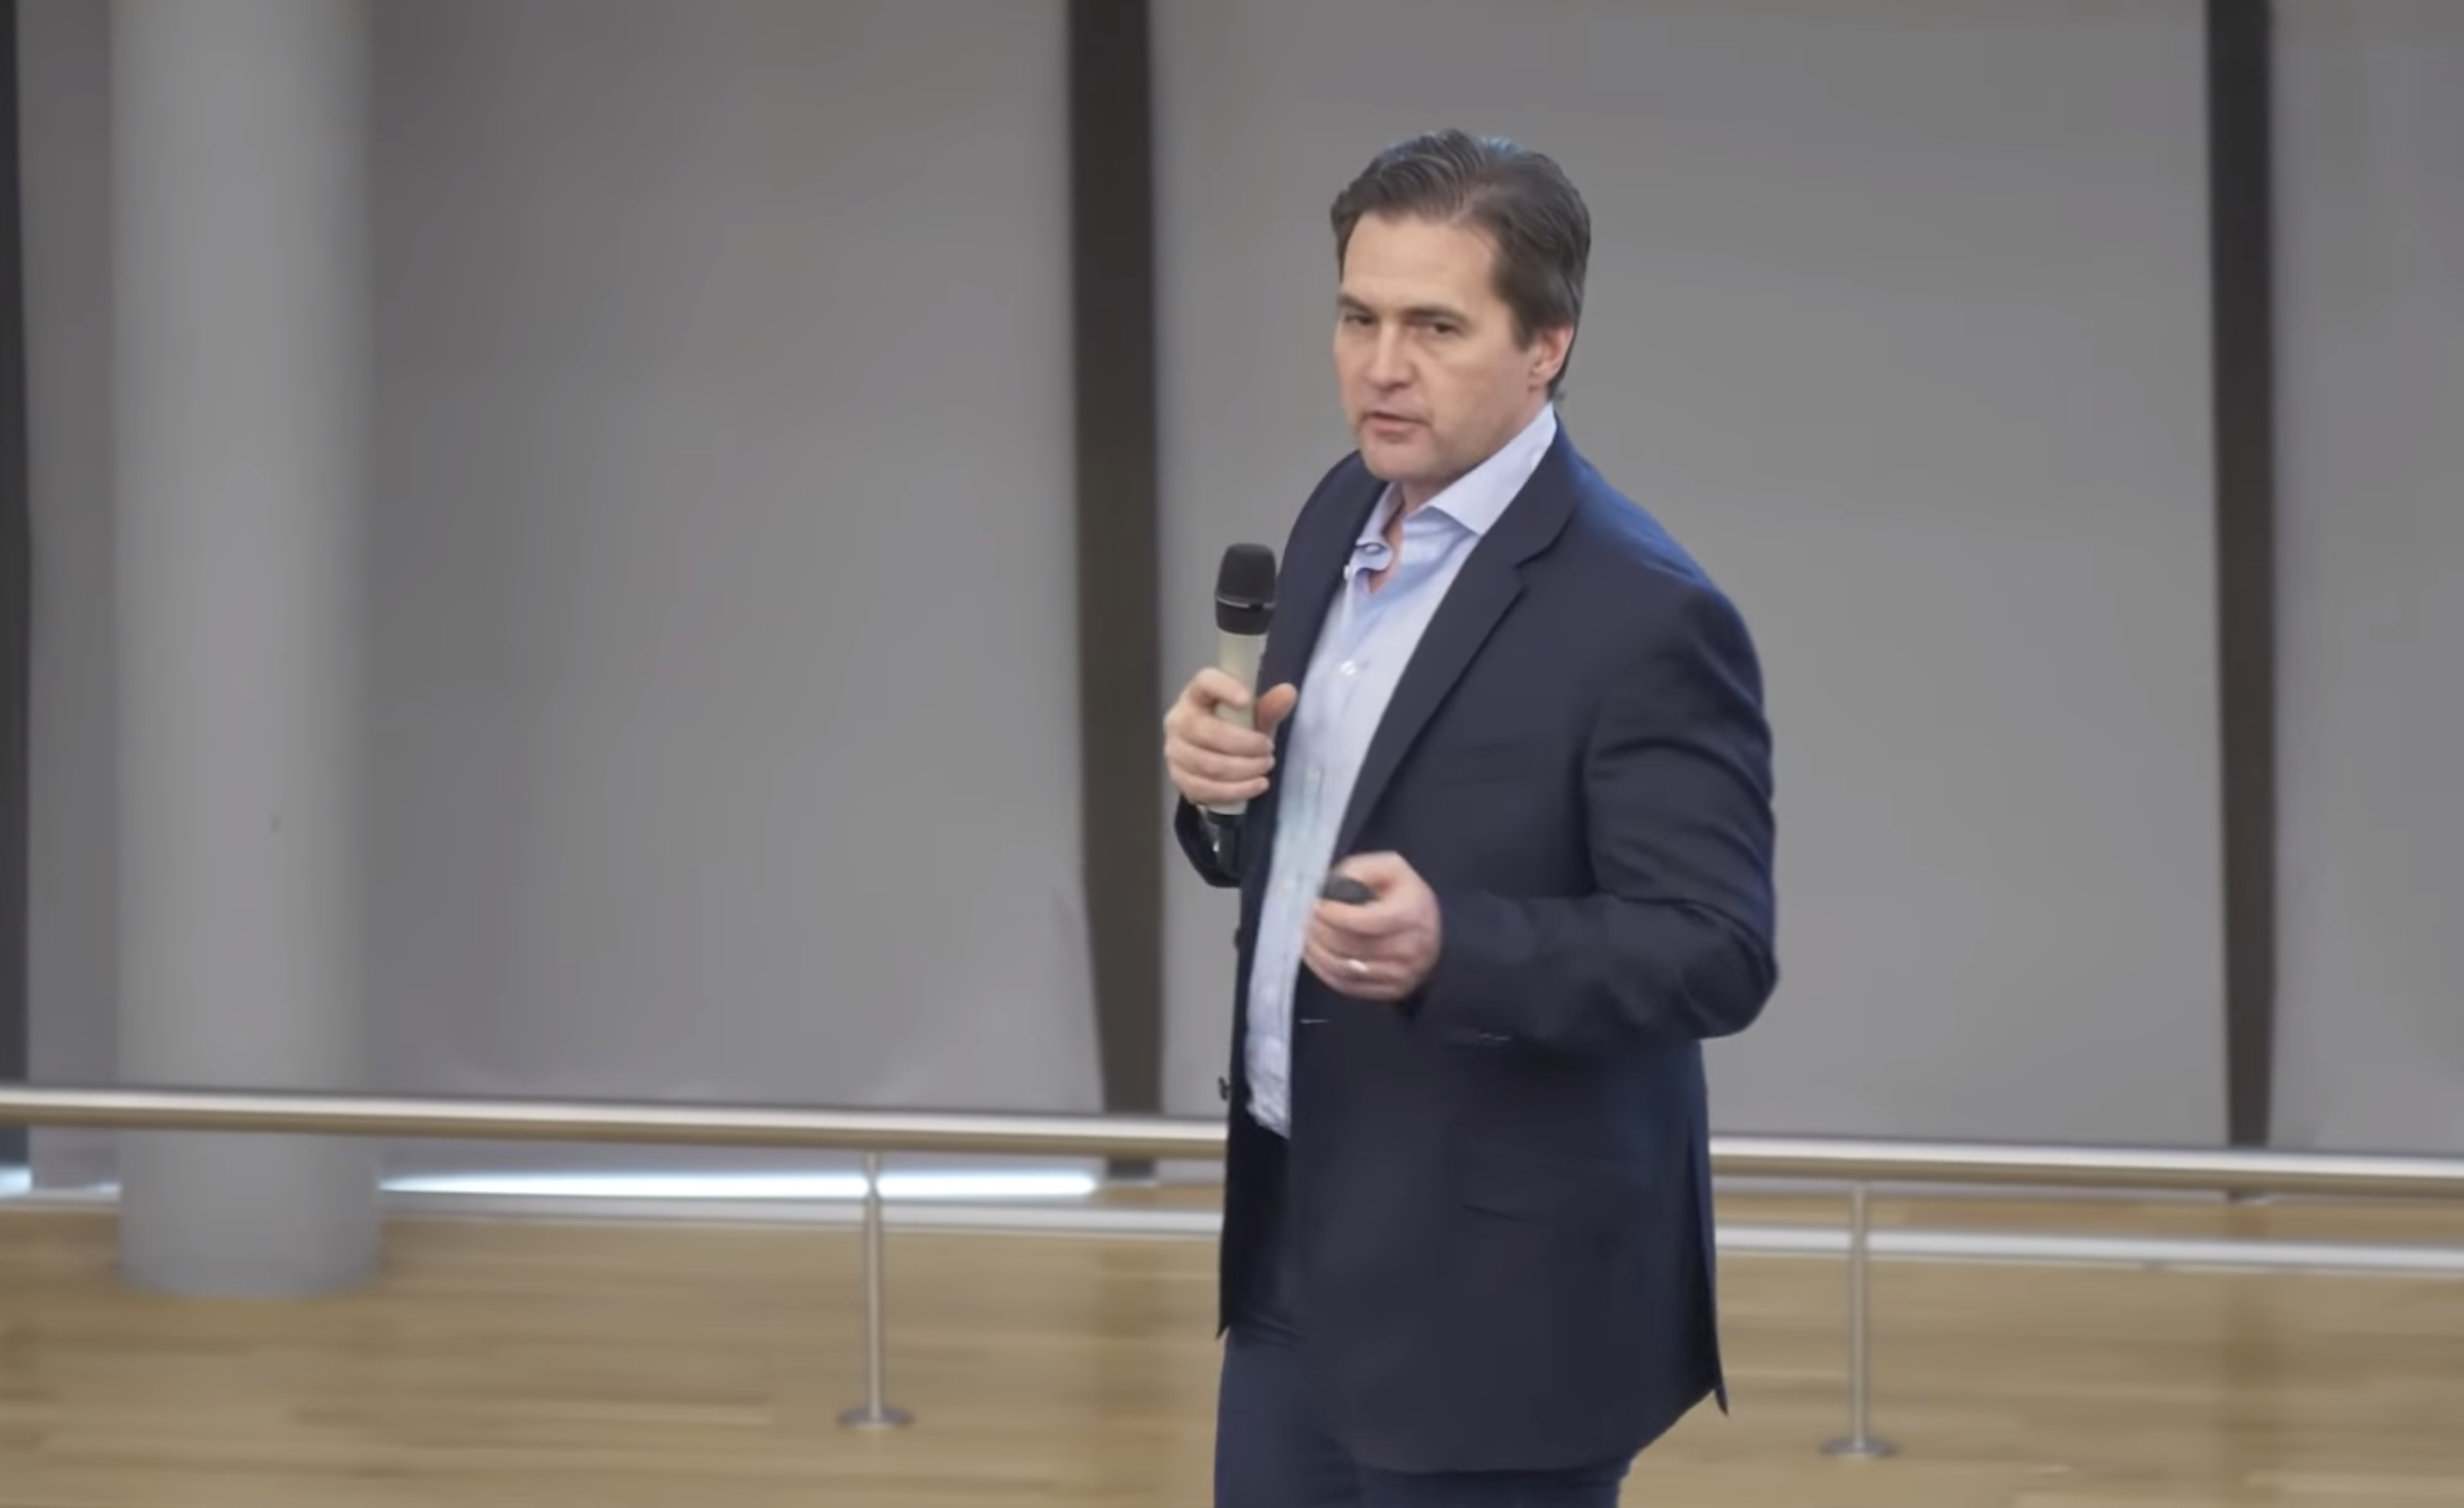 In-new-court-filing,-craig-wright-claims-to-receive-keys-to-$9.6b-bitcoin-fortune